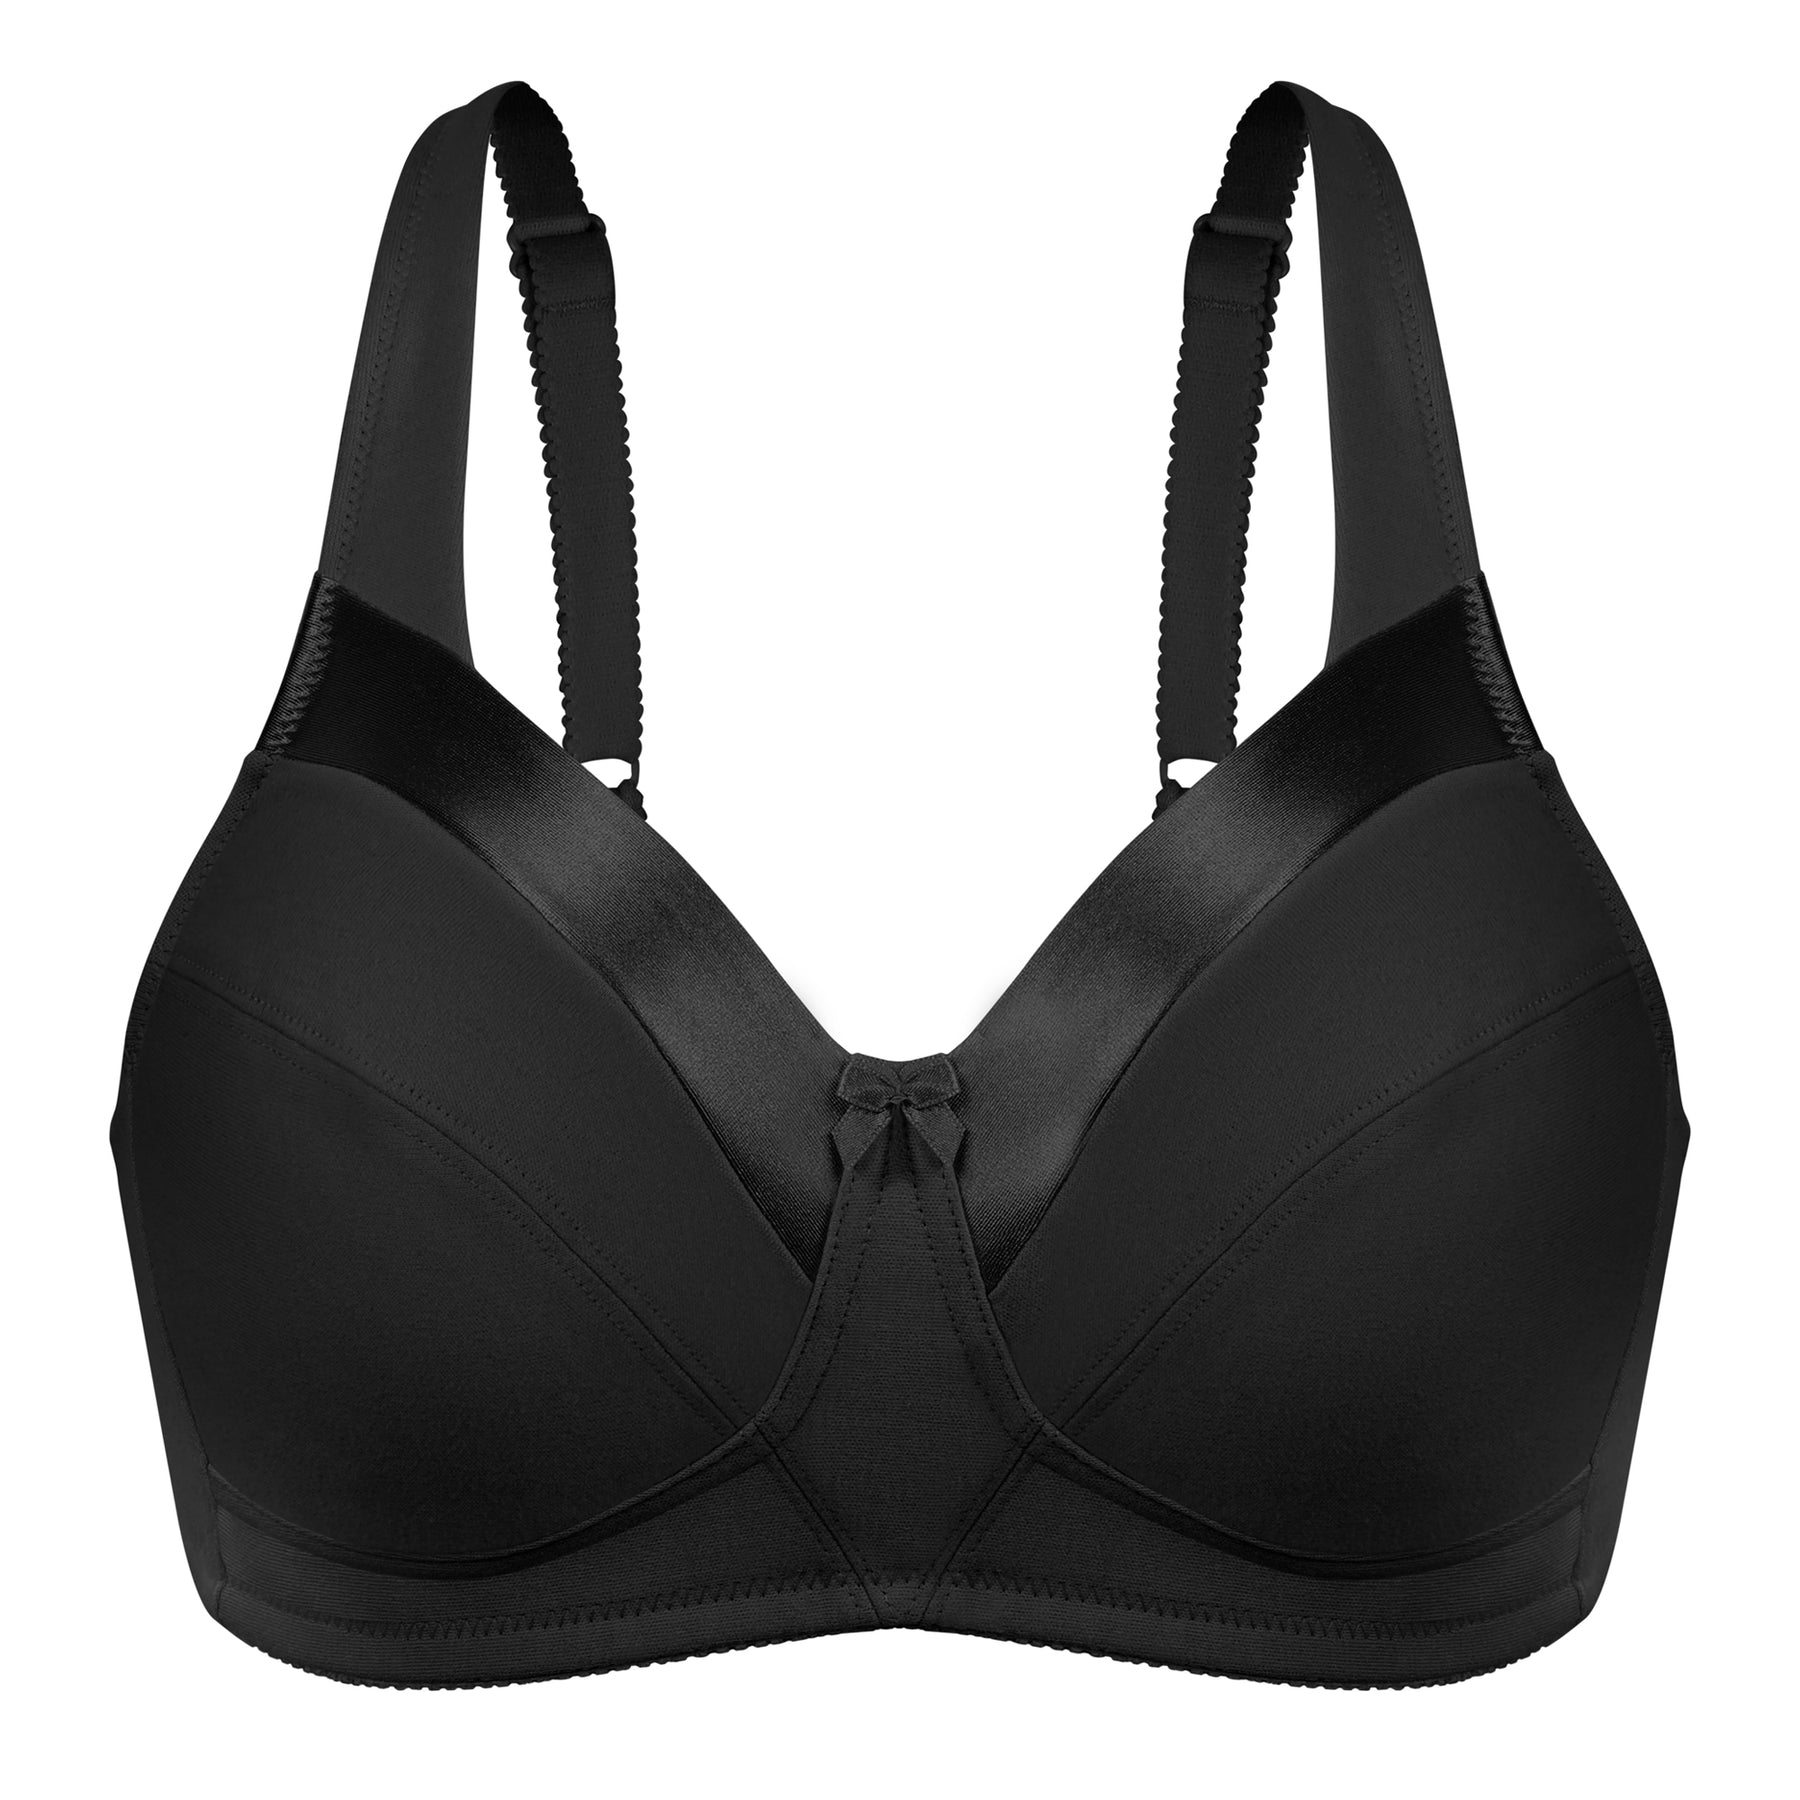 Maternal bra made of luxury combed cotton (001015)